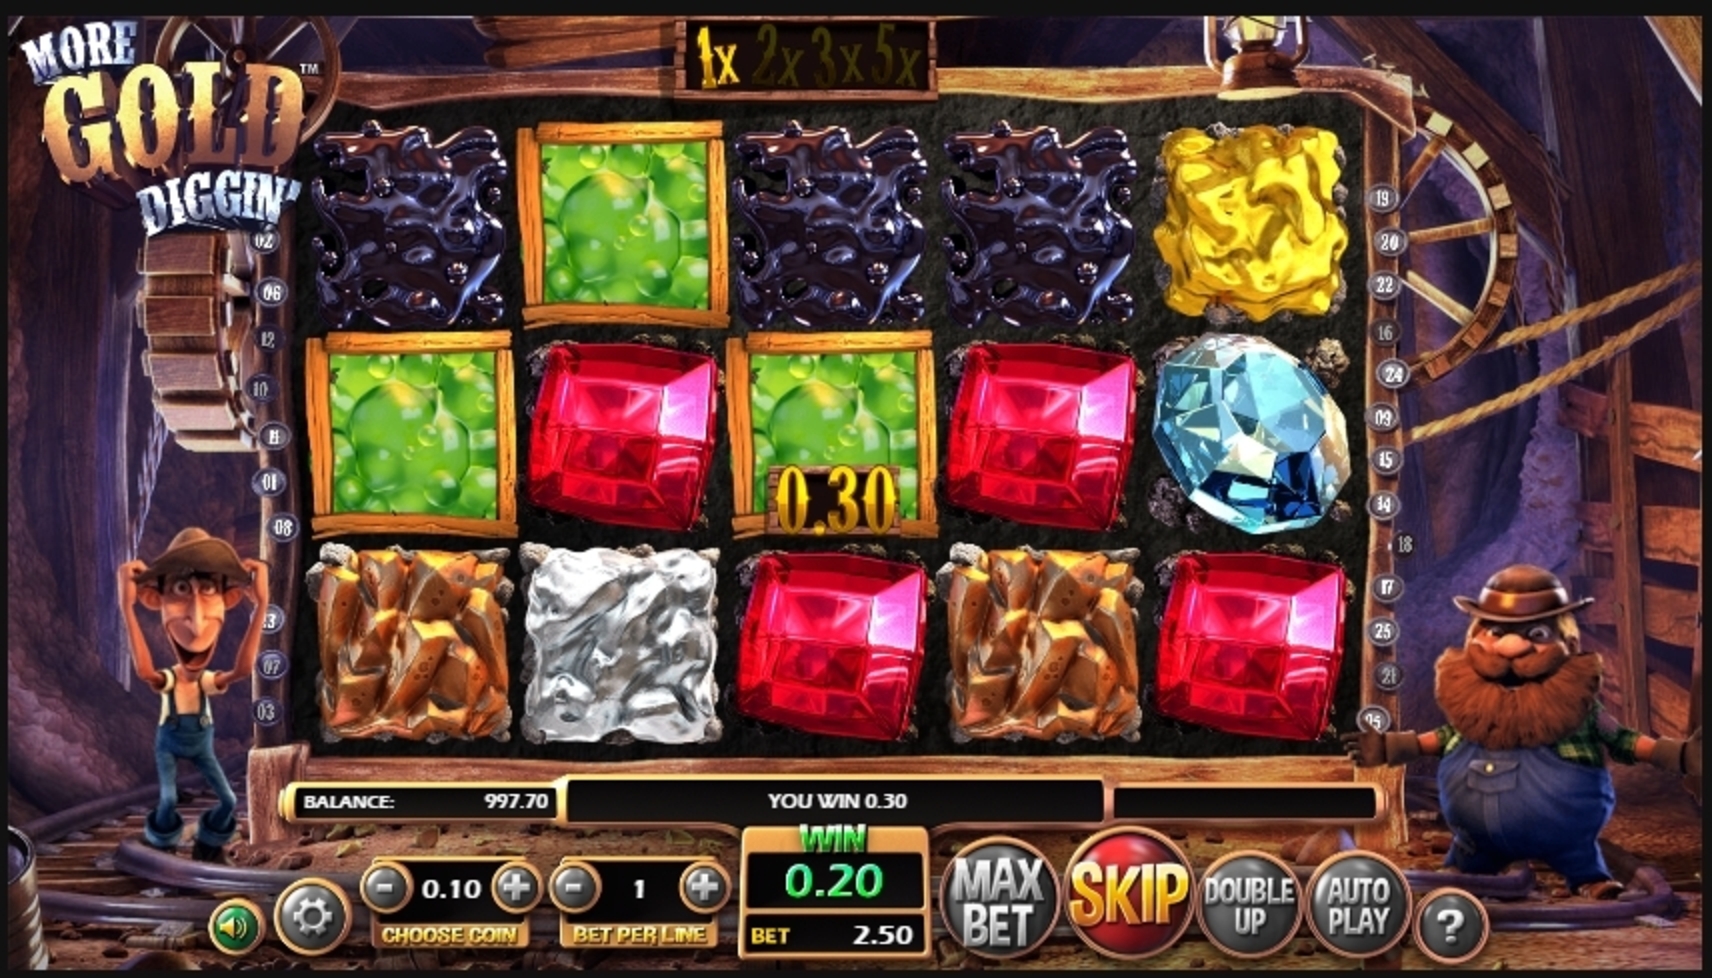 Win Money in More Gold Diggin Free Slot Game by Betsoft